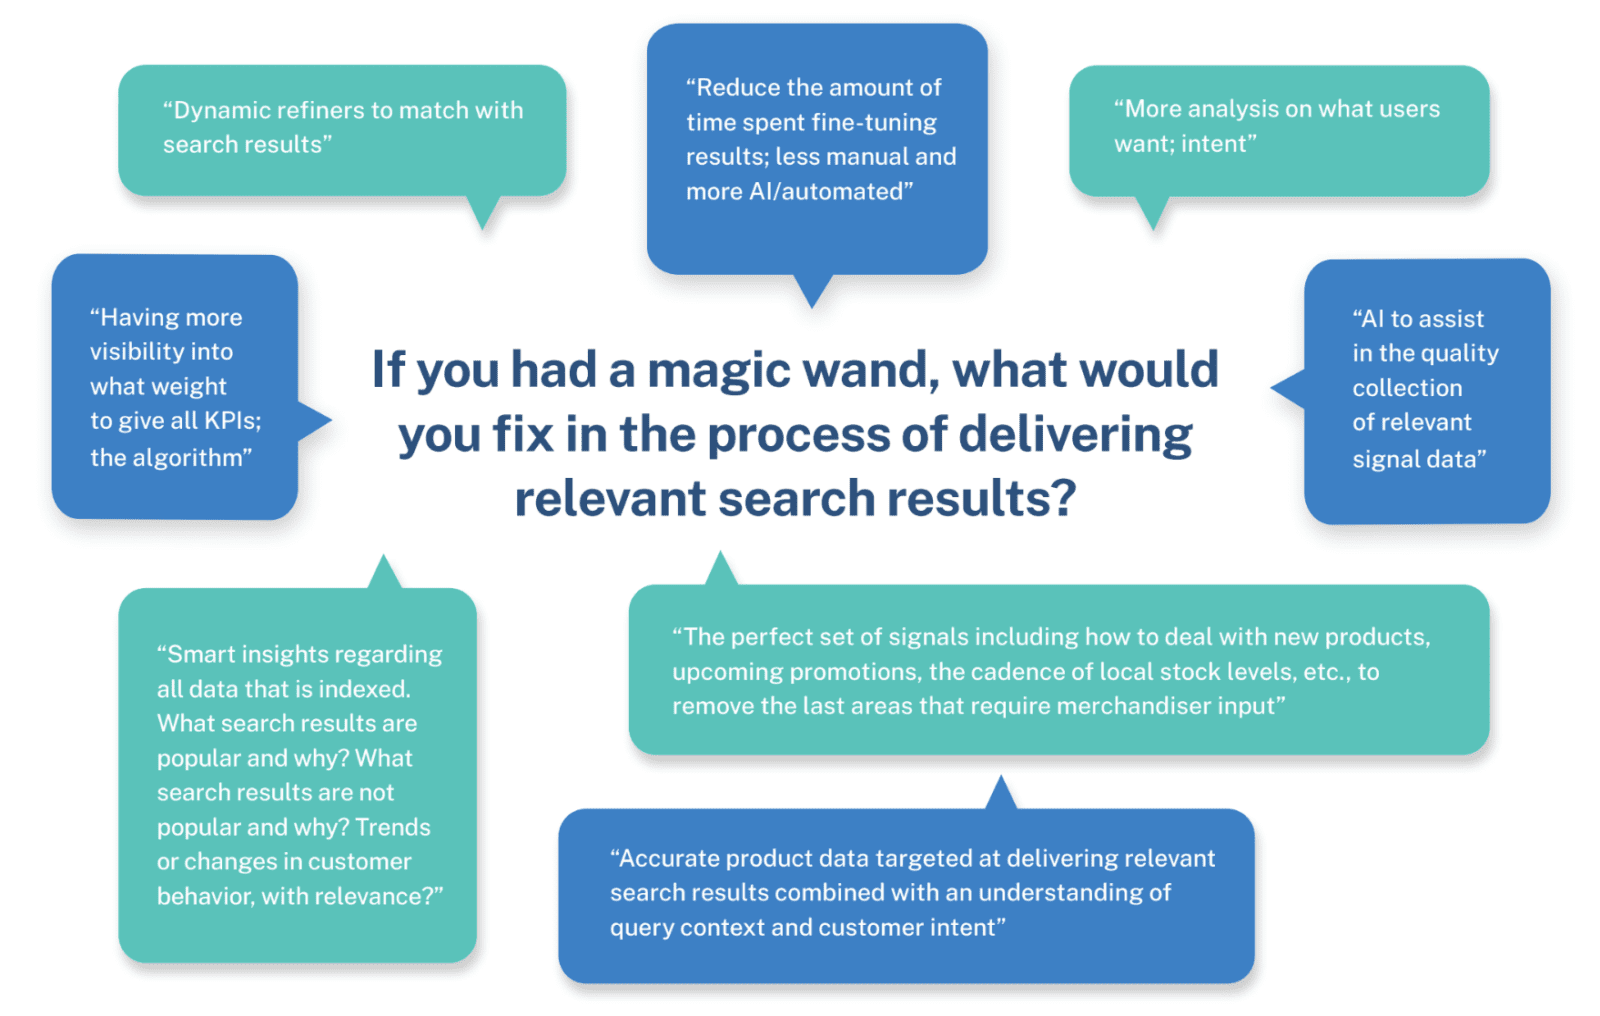 Examples of what search practitioners would fix in their process.